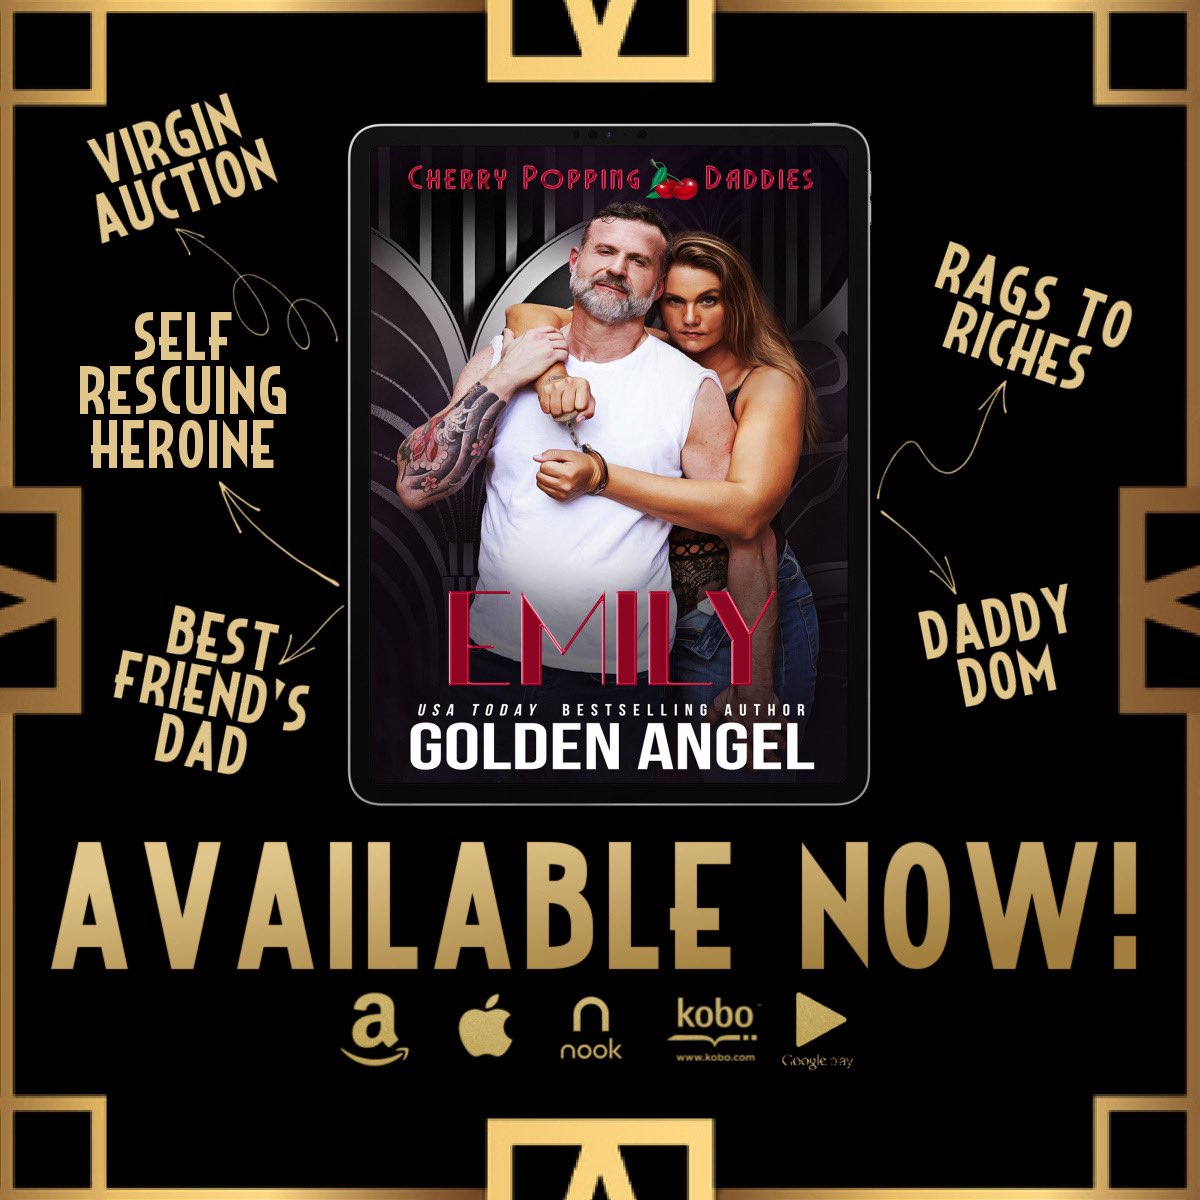 🍒 VIRGIN AUCTION DADDY ROMANCE 🔥 The newest release from Golden Angel Romances is bringing all the heat. Grab your copy of Emily today! Universal: geni.us/CPDEmily He’s my best friend’s dad. Now I call him Daddy.